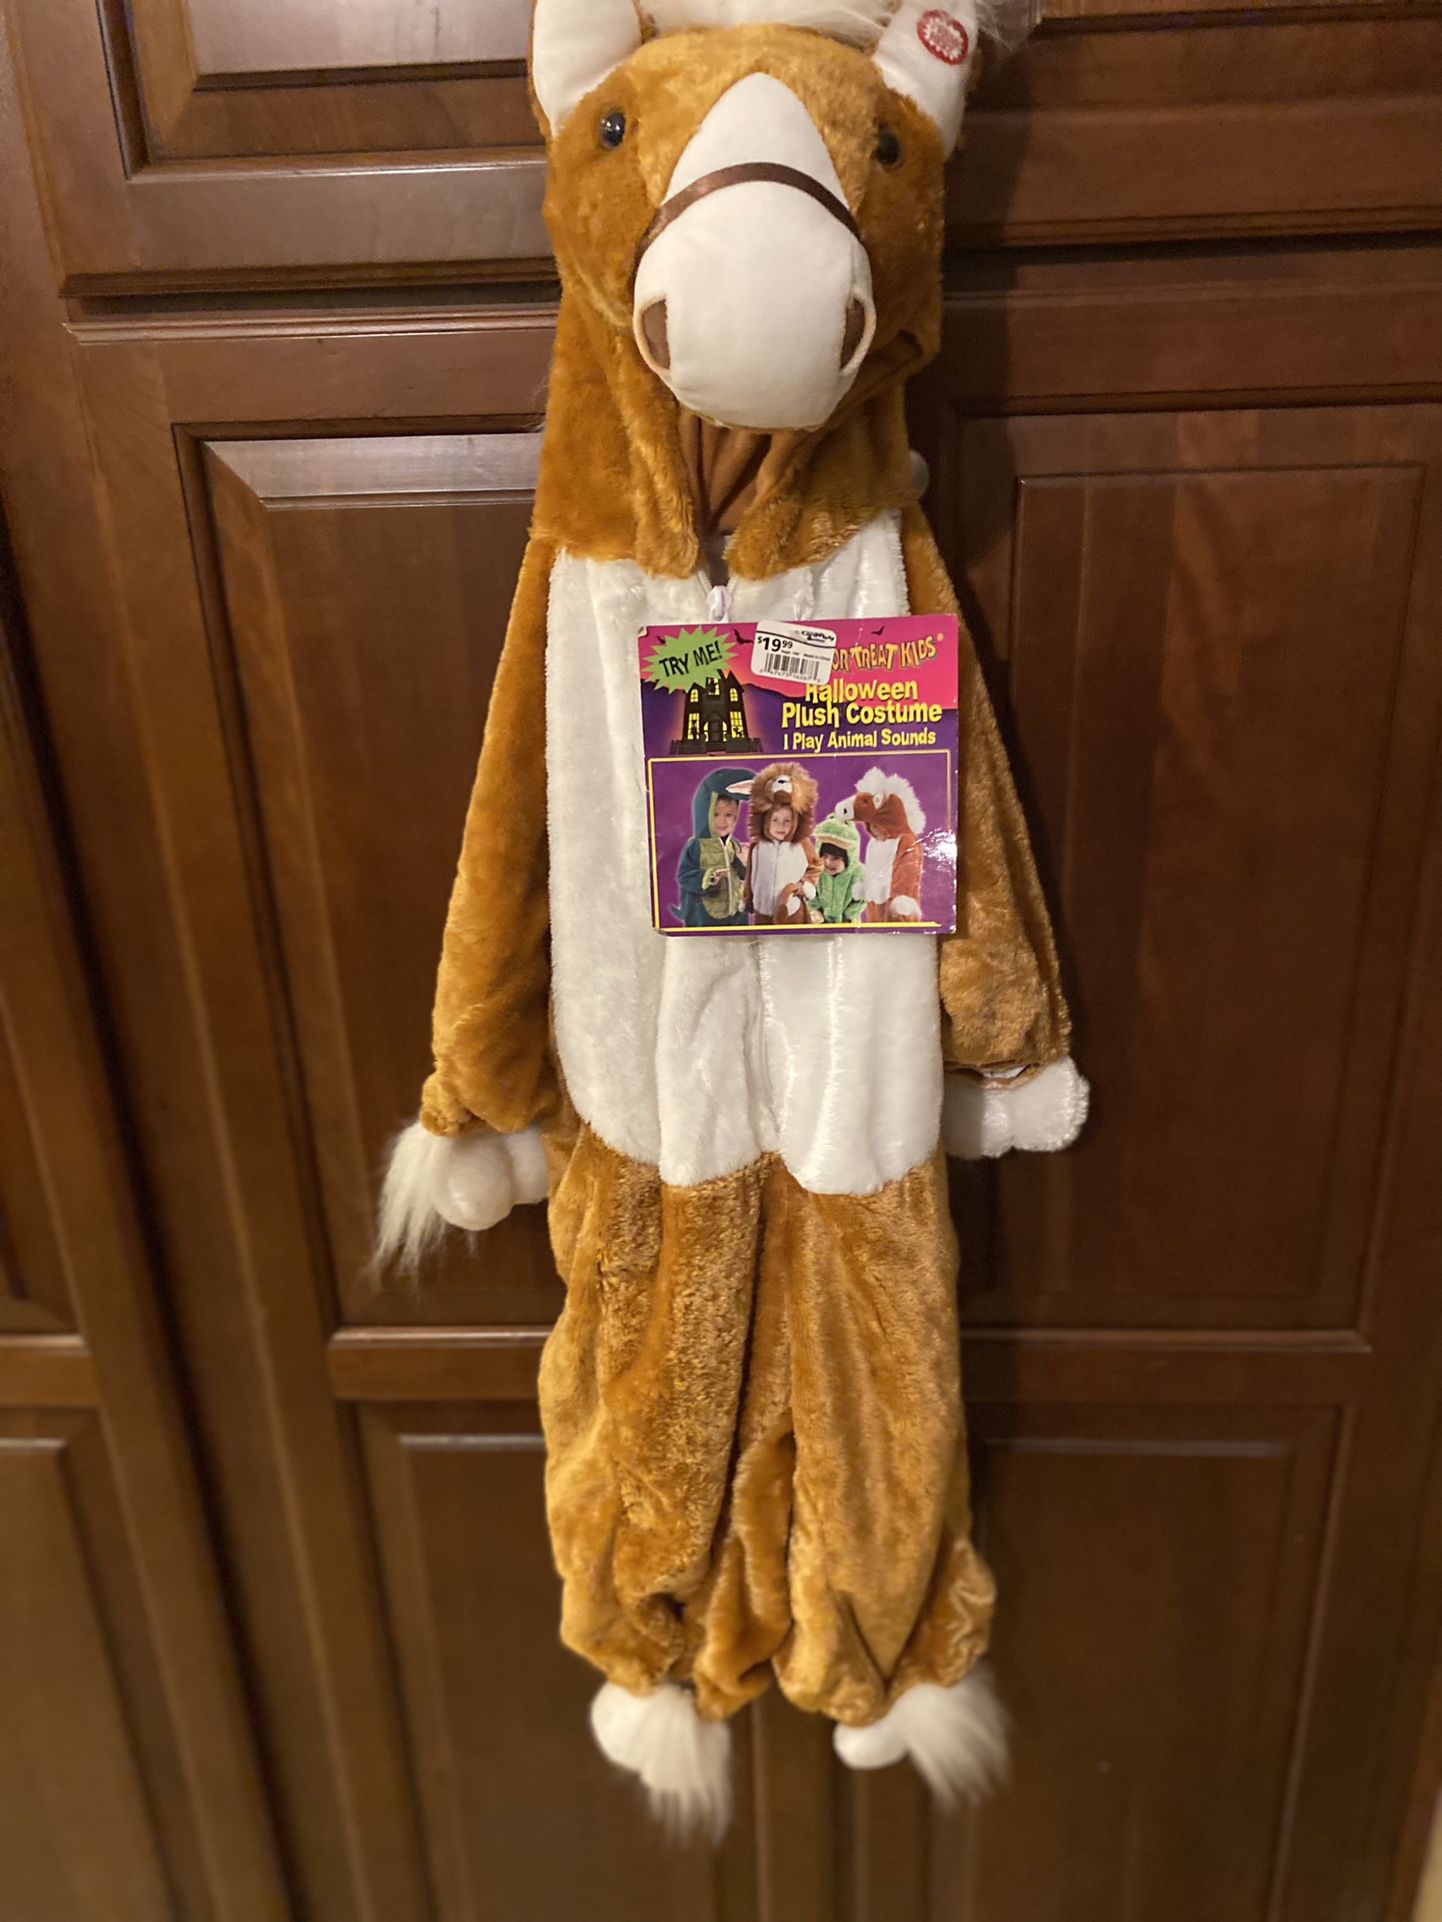 Hors costume plays animal sounds 2 -4 yr olds